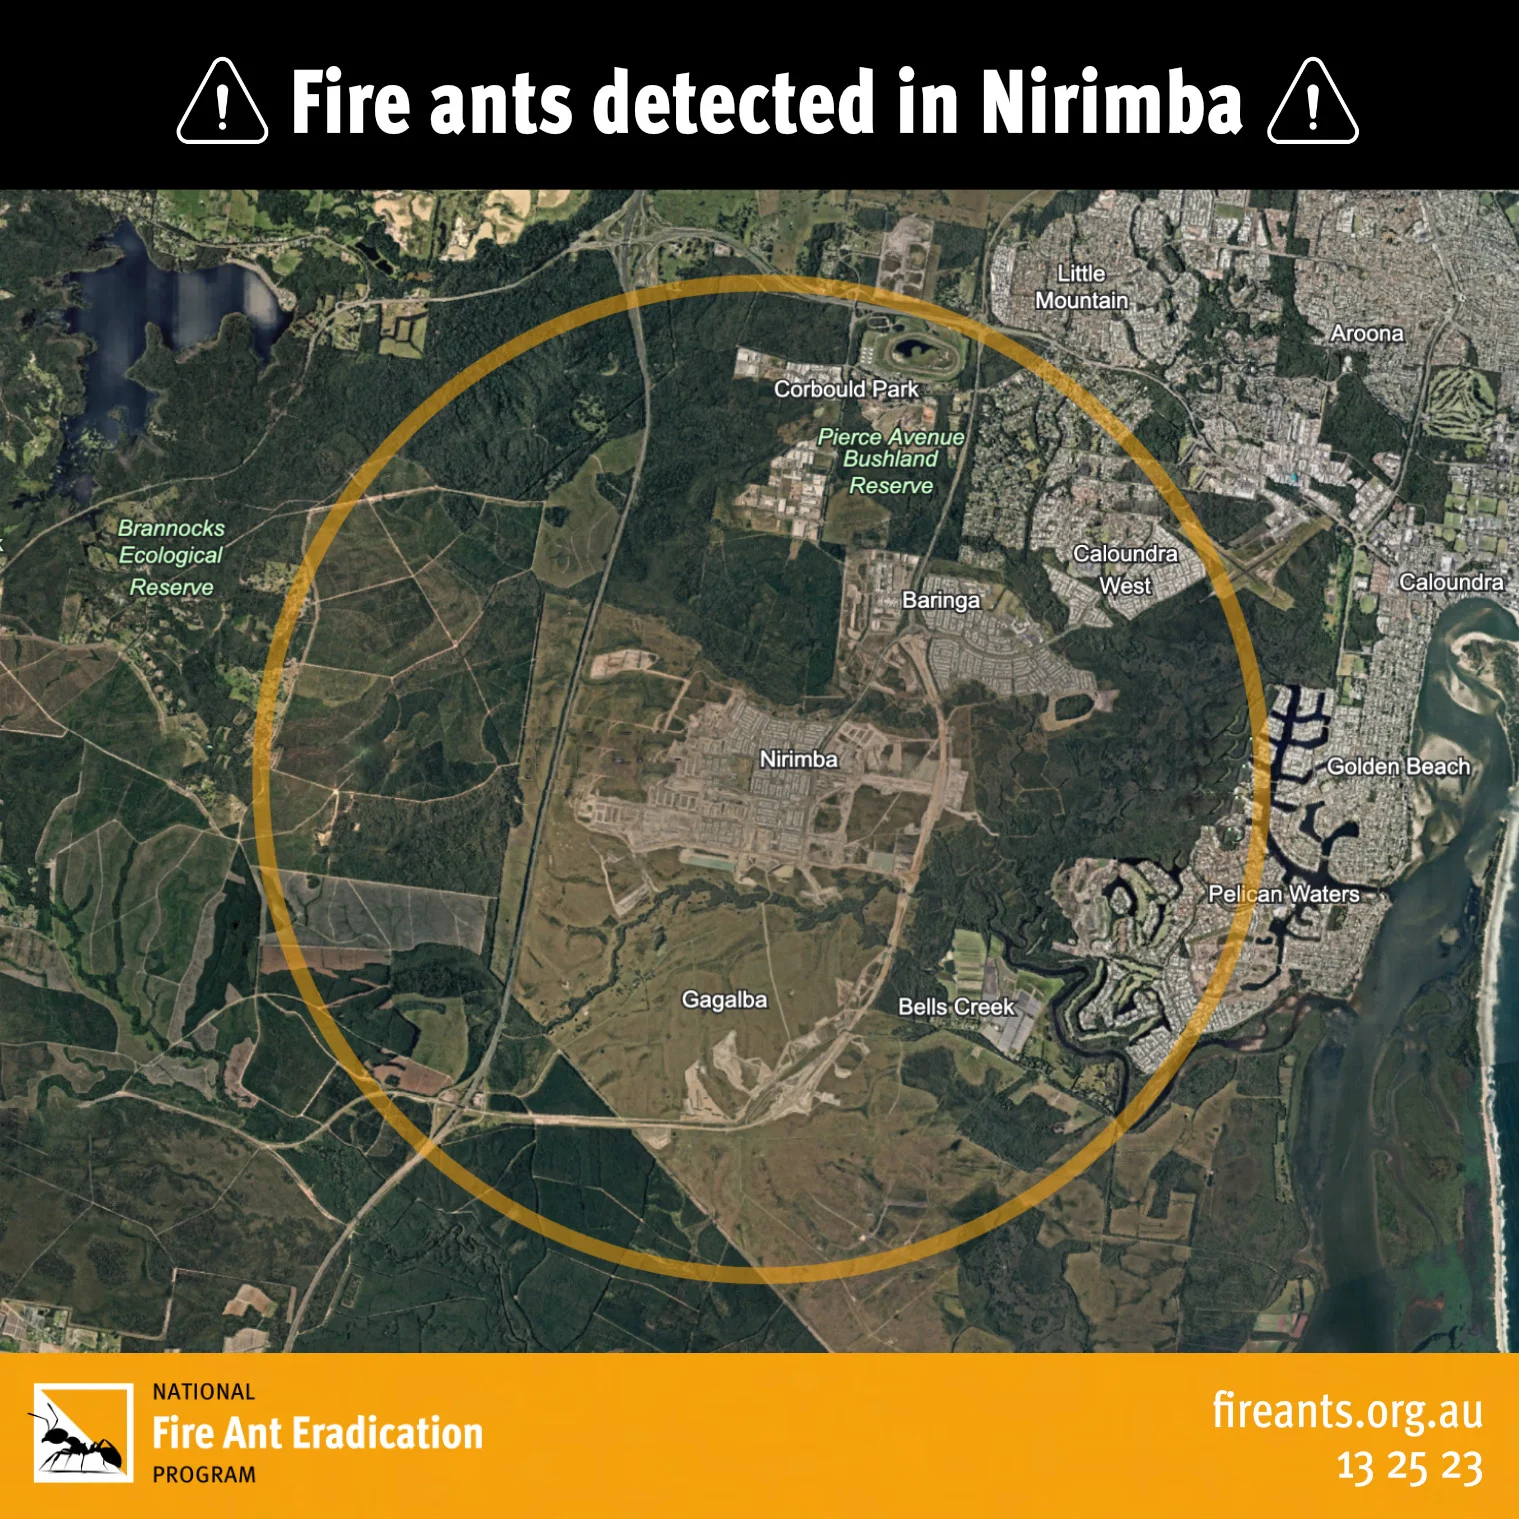 DAF Fire ants detected with map of Nirimba. Image credit: Department of Agriculture and Fisheries, Queensland Government. Used with permission